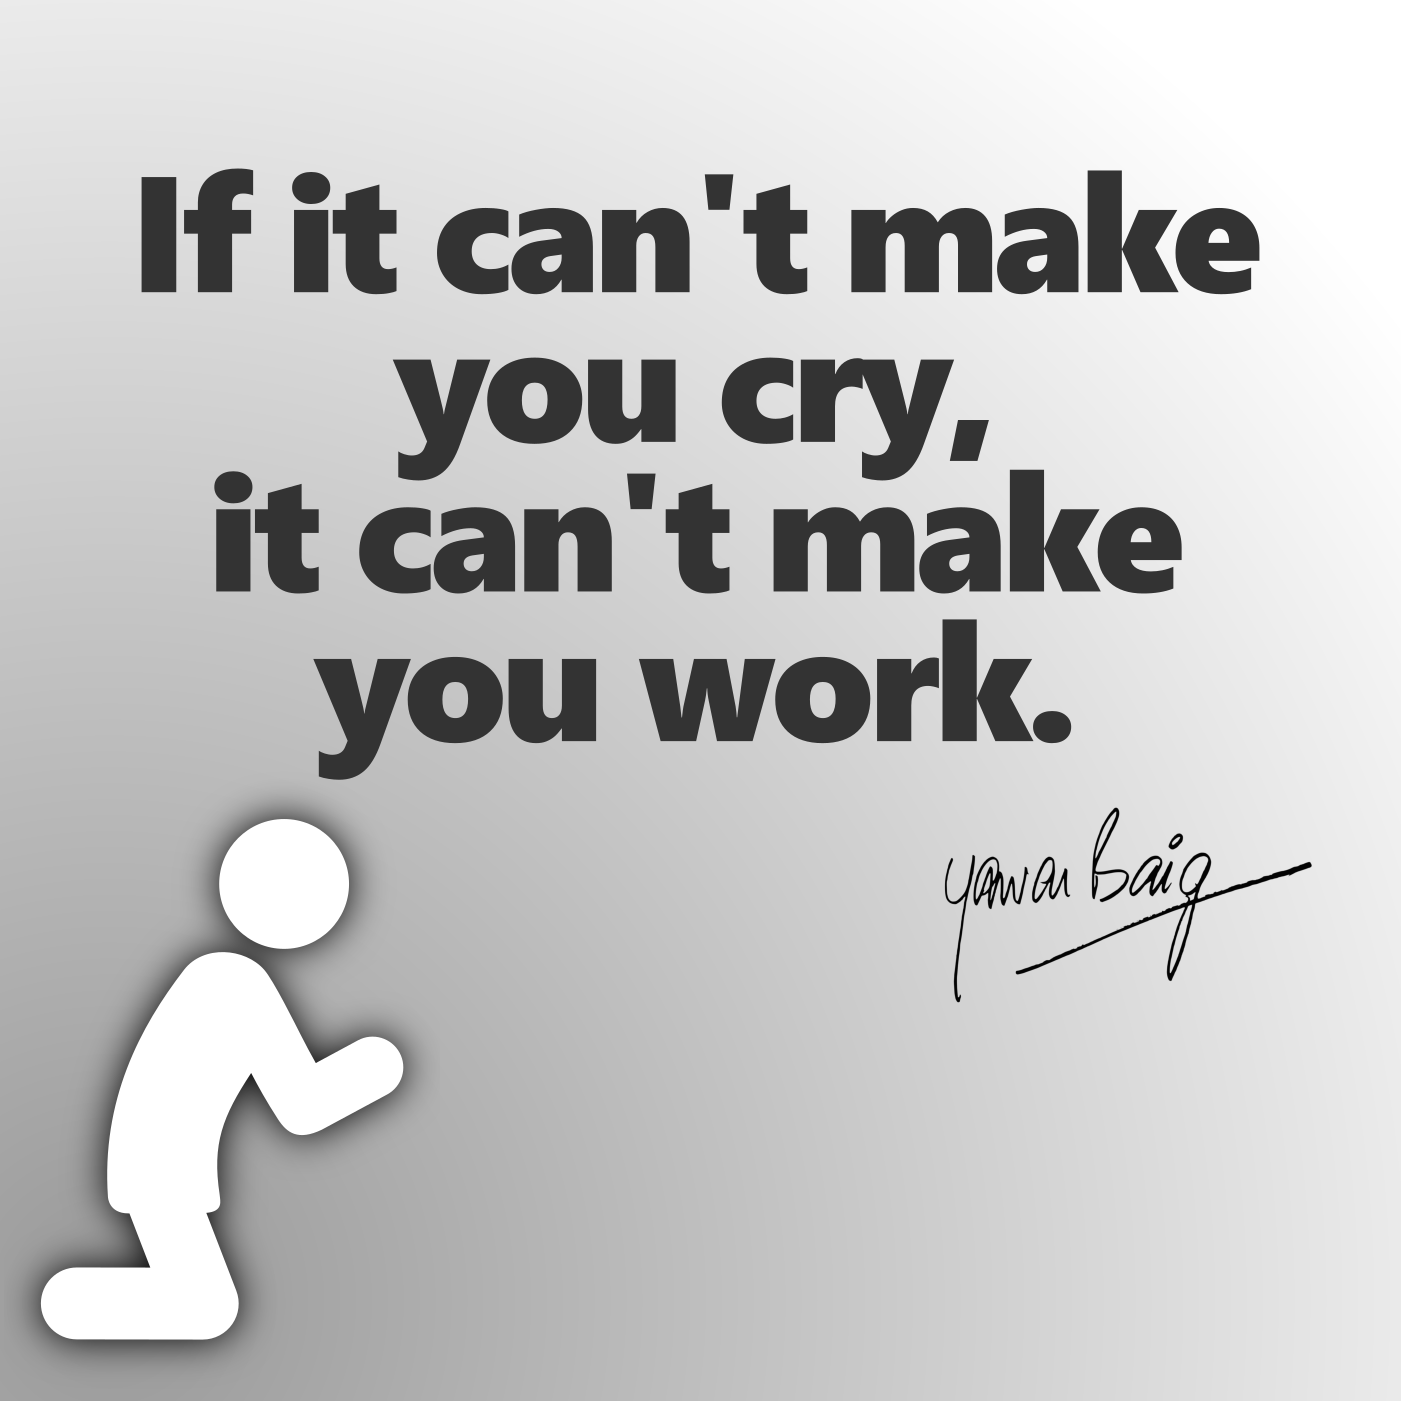 If it can’t make you cry, it can’t make you work